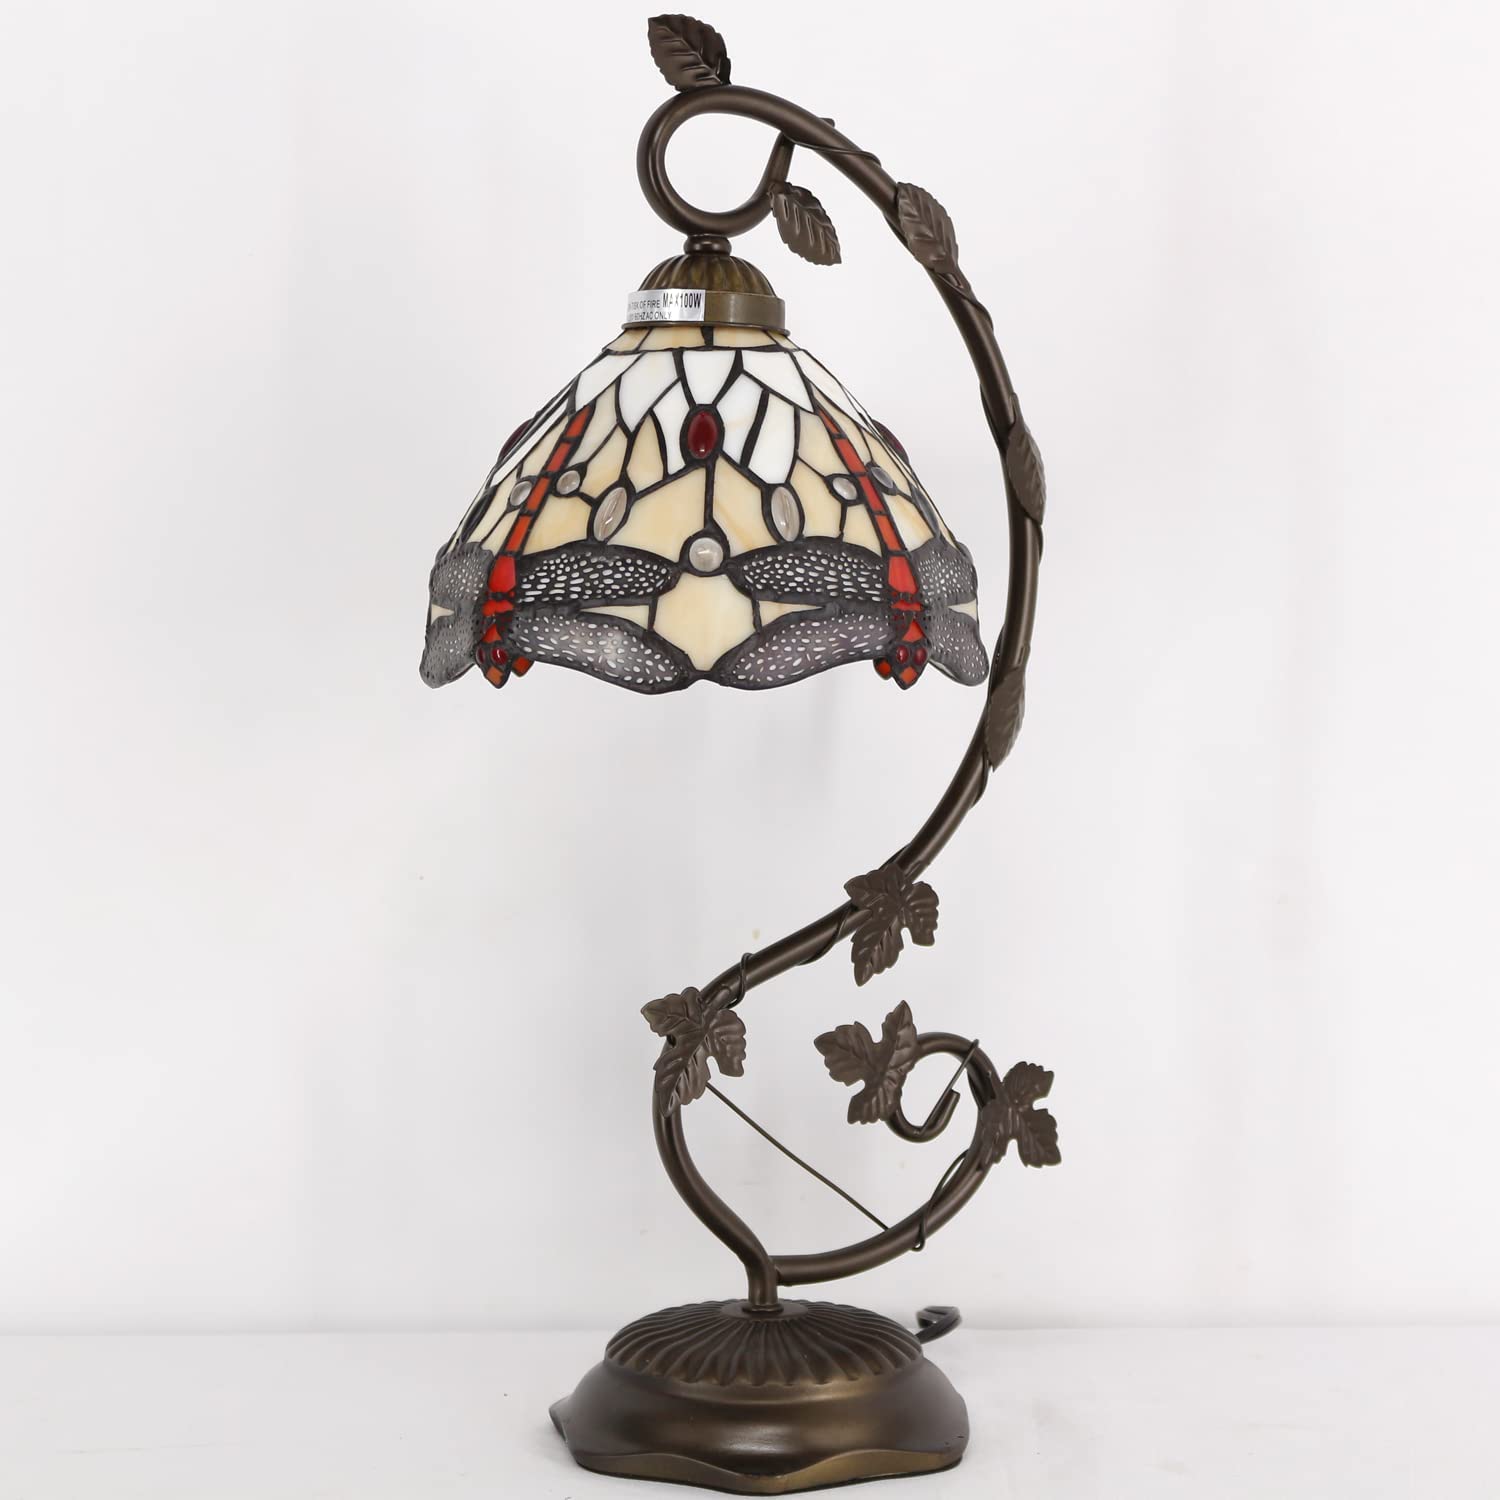 SHADY  Style Lamp Amber Stained Glass Dragonfly Table Lamp  Metal Leaf Base 8X10X21 Inches Desk Light Decor Small Space Bedroom Home Office S557 Series